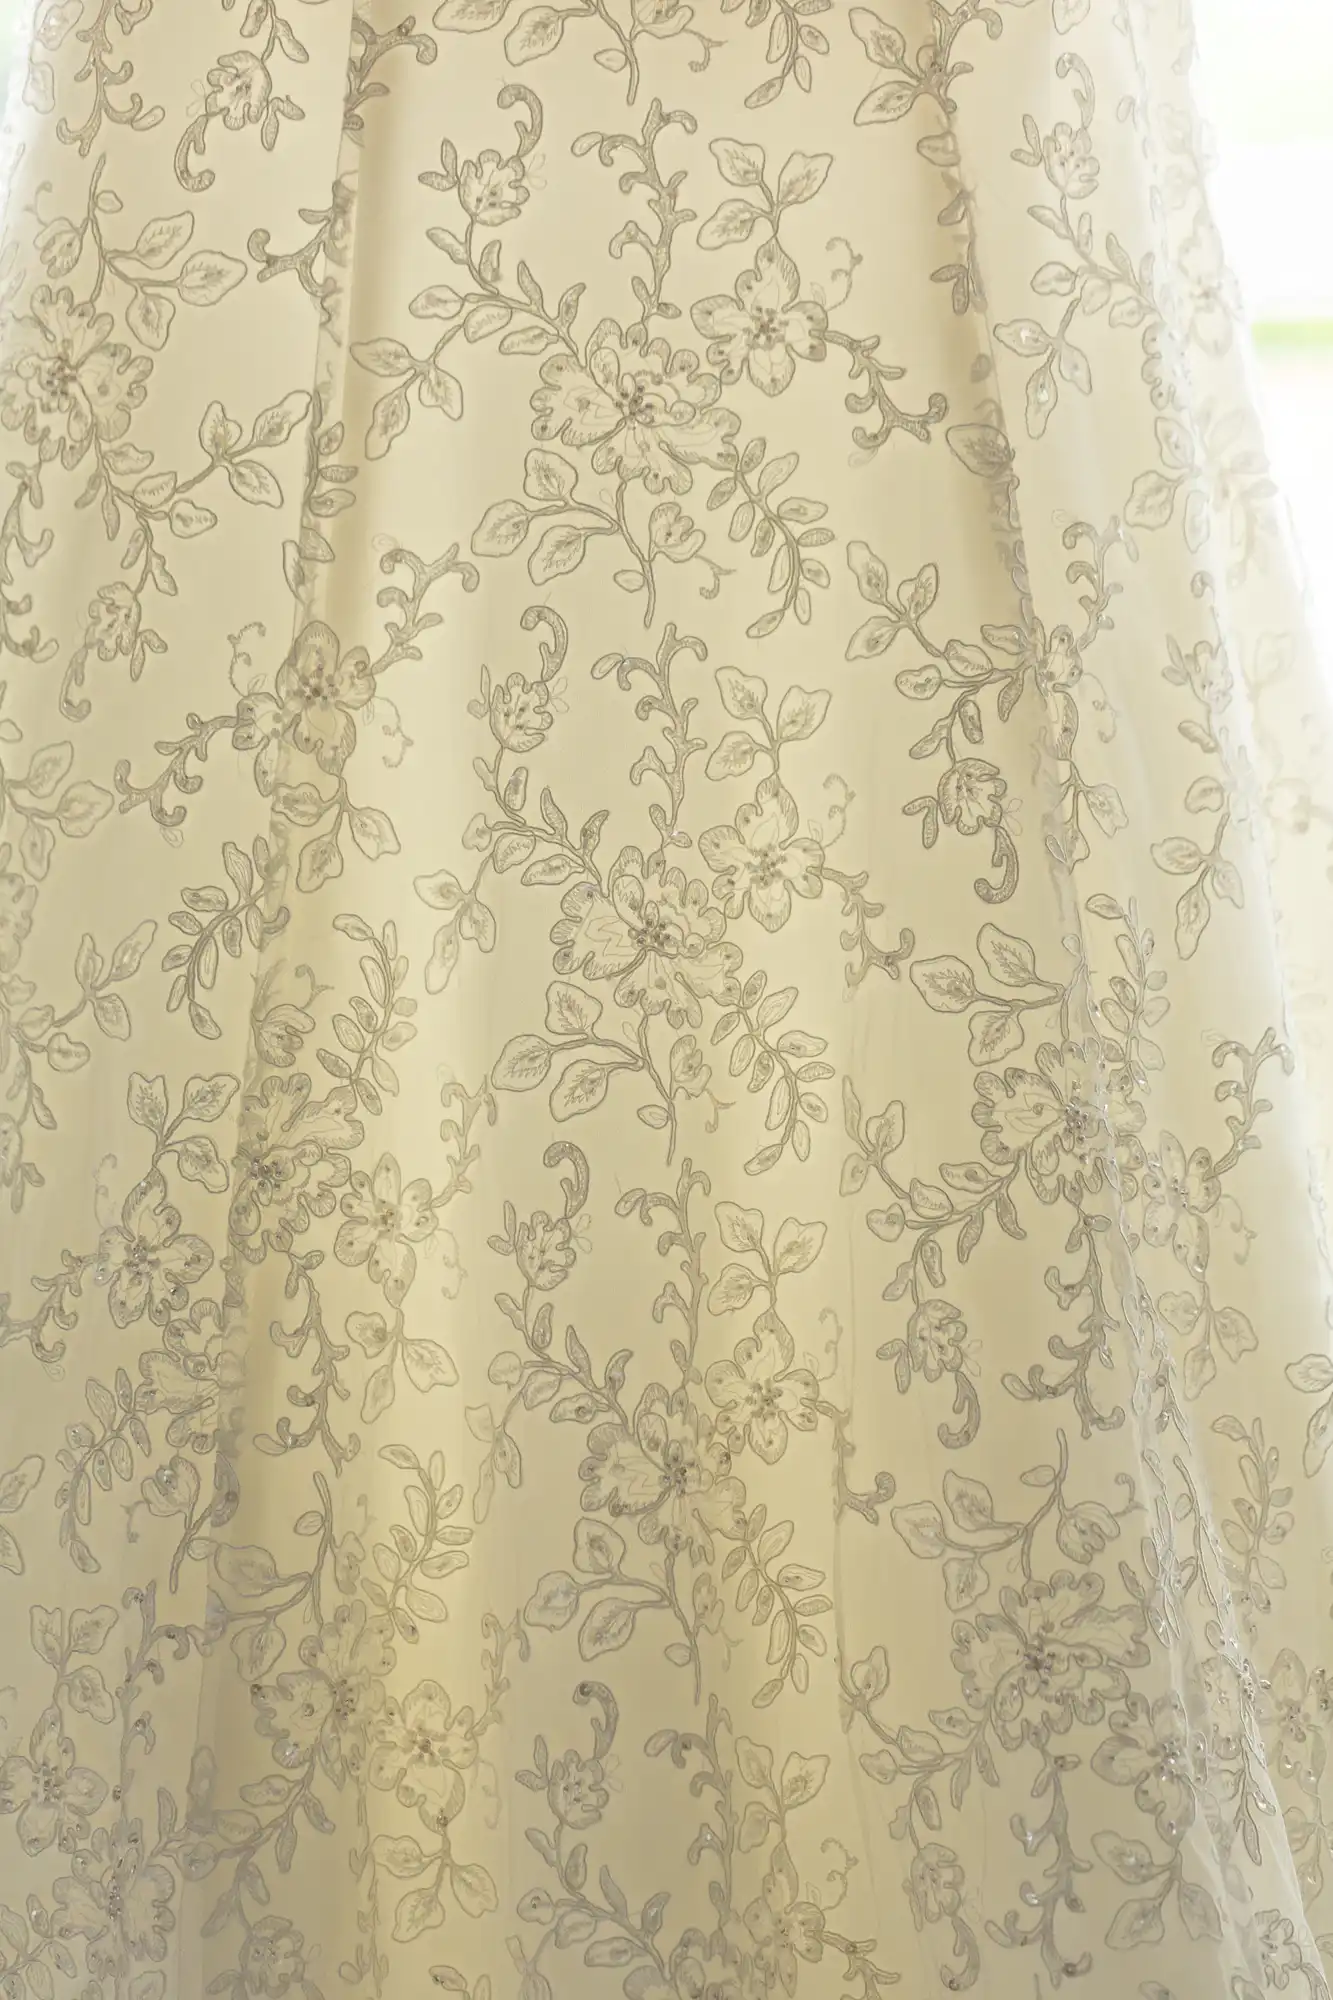 Sheer curtain with an embroidered floral pattern, backlit by natural light, creating a soft, translucent effect.